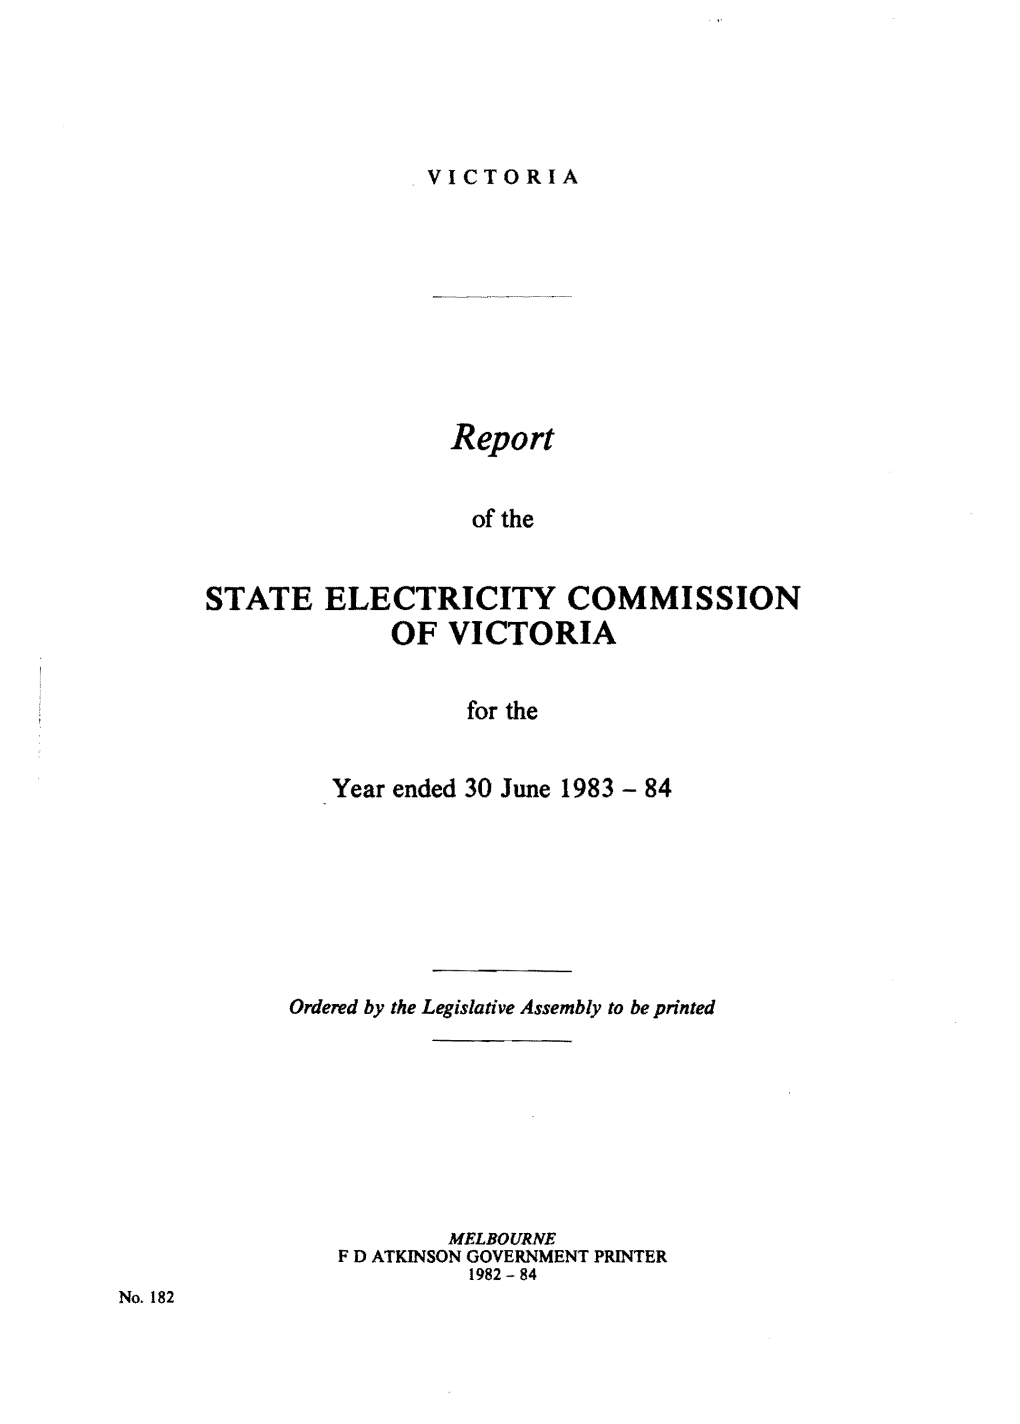 State Electricity Commission of Victoria